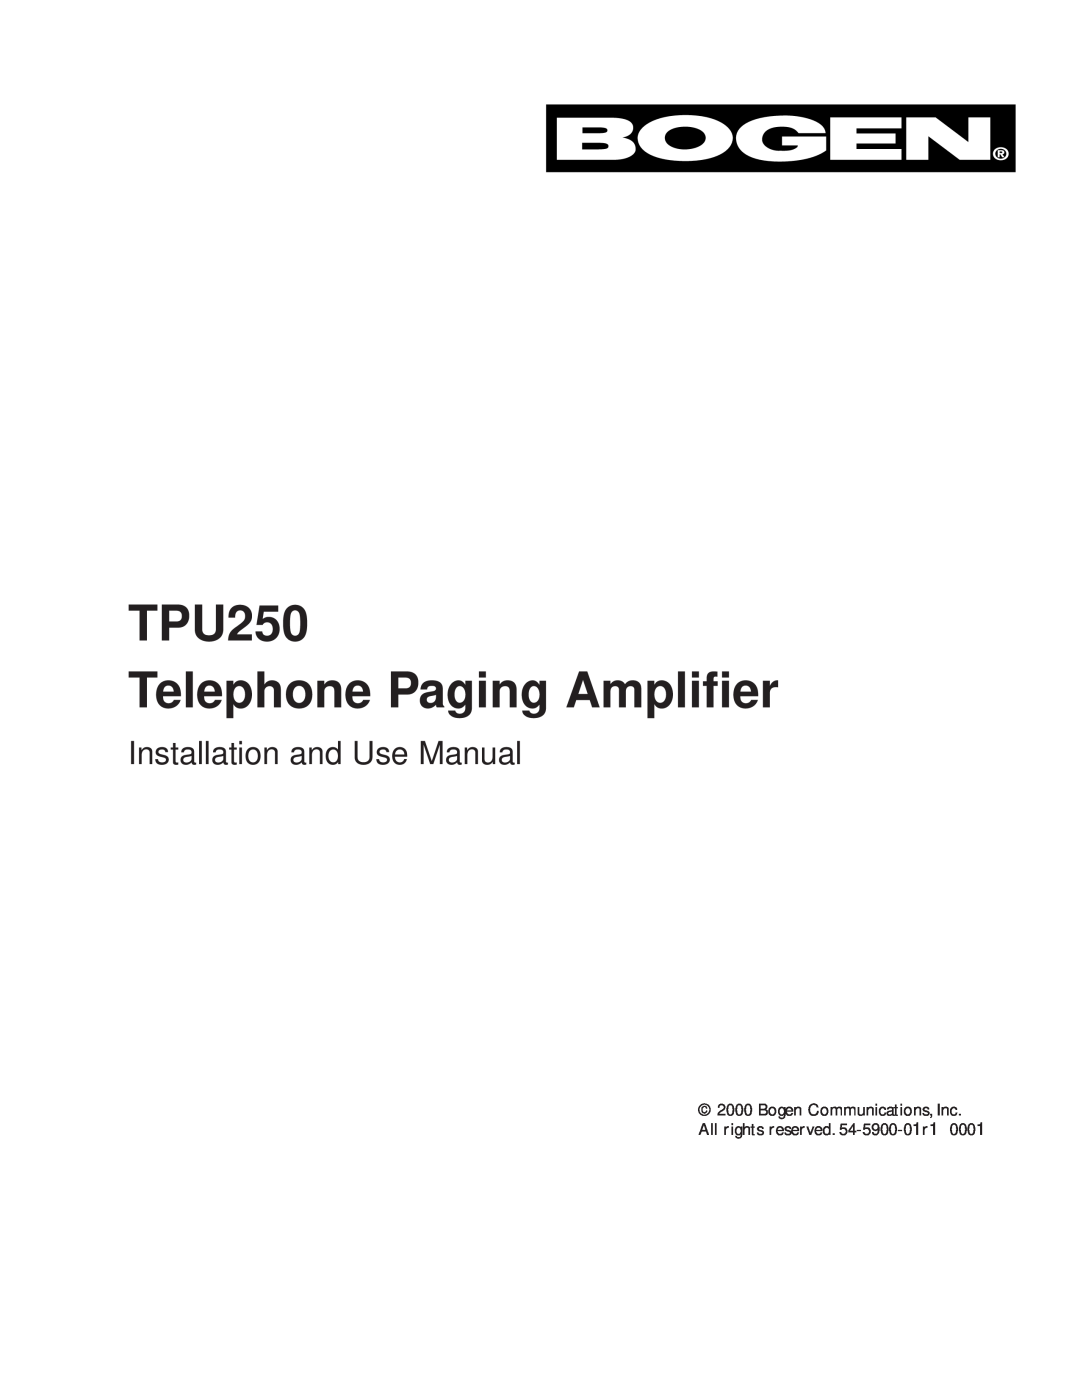 Bogen manual TPU250 Telephone Paging Amplifier, Installation and Use Manual 